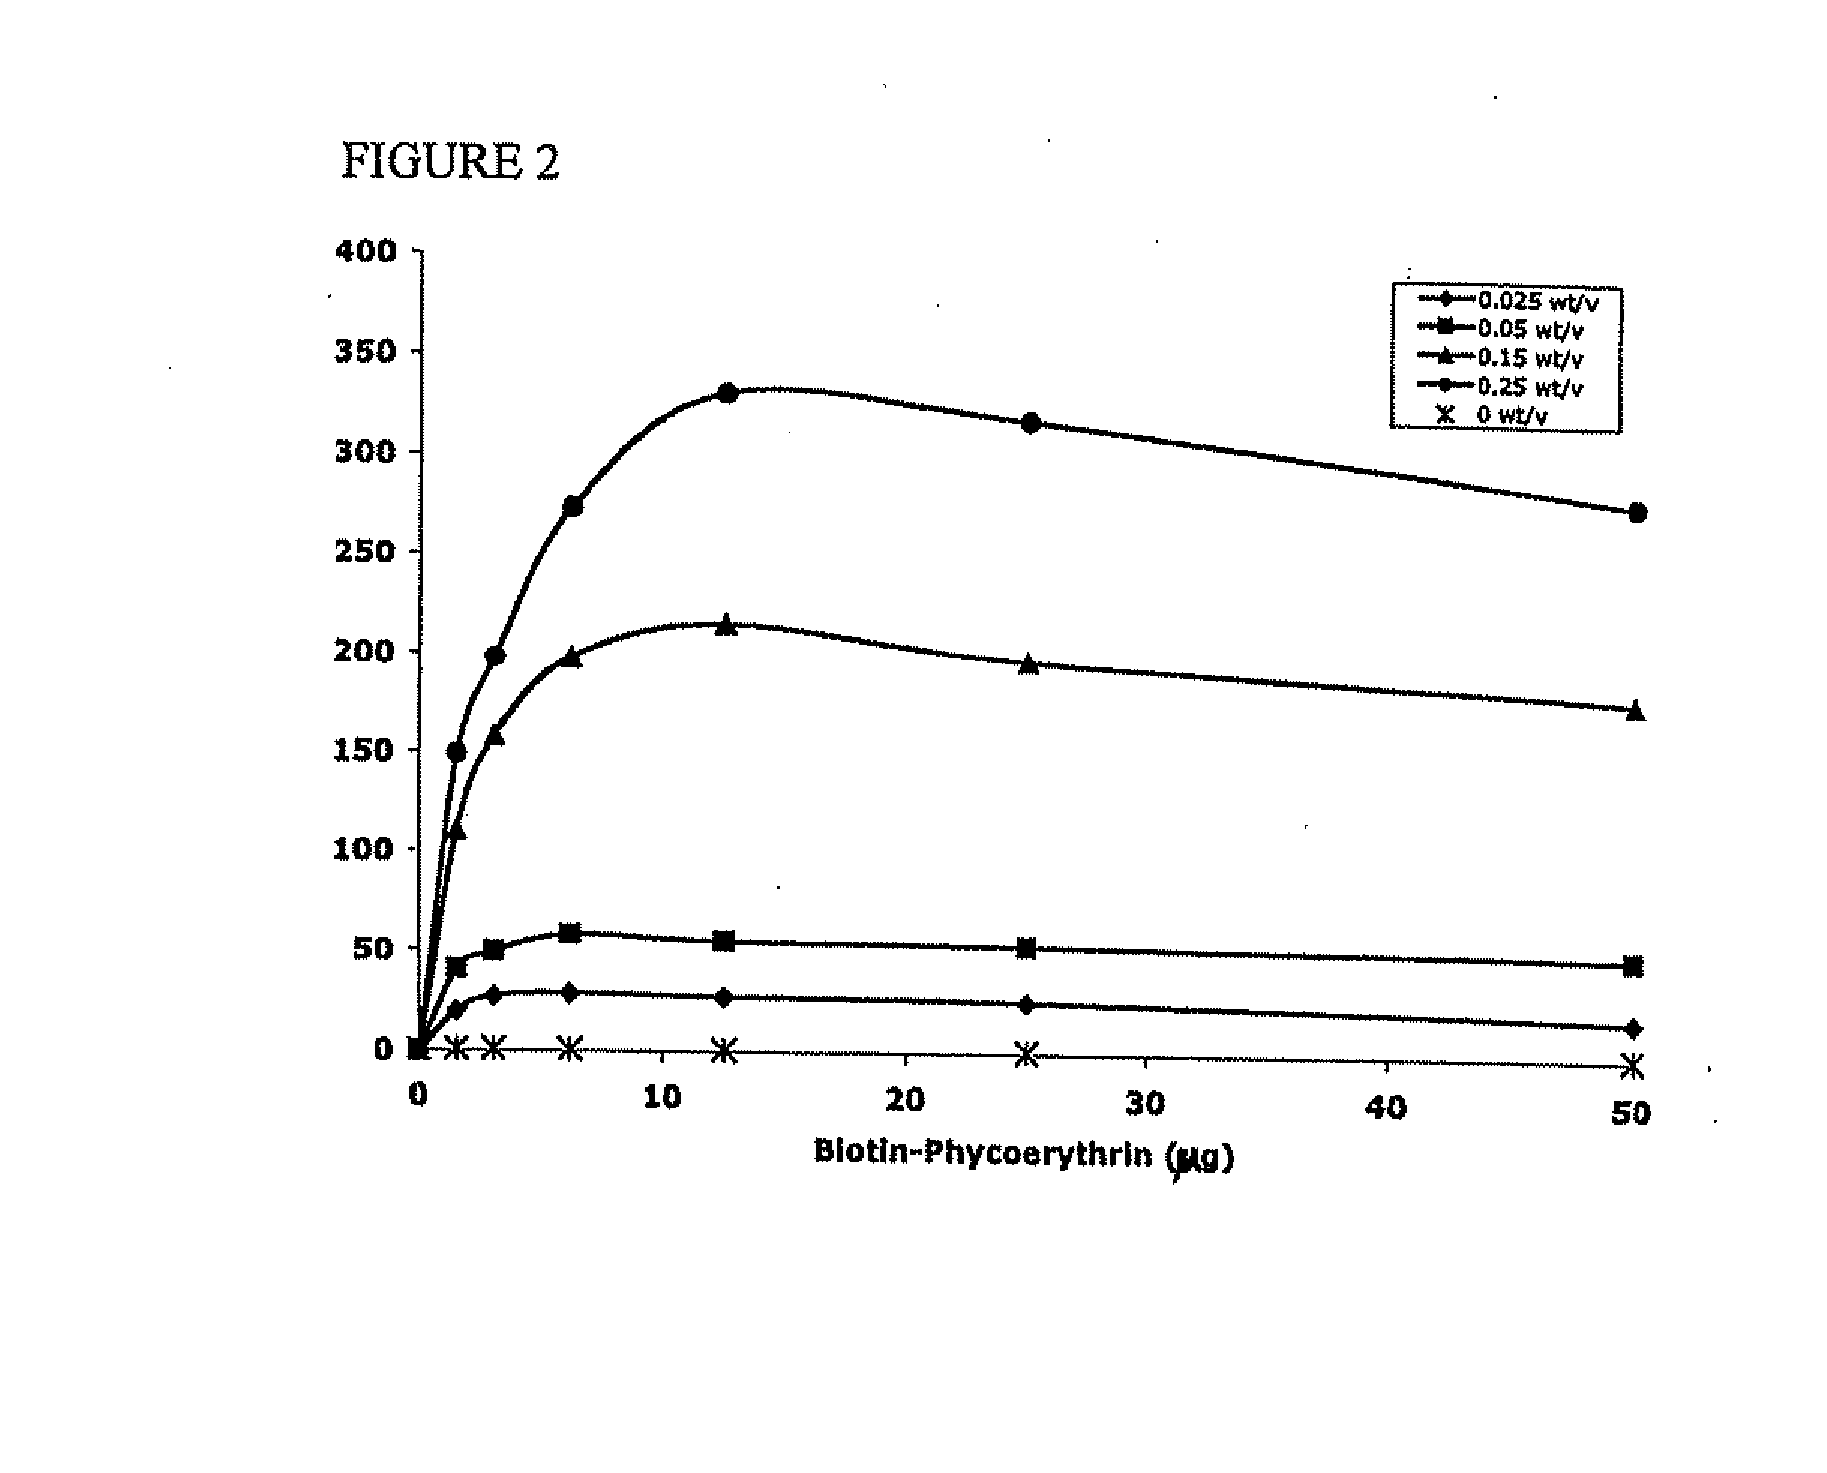 Methods of Treatment with Drug Loaded Polymeric Materials